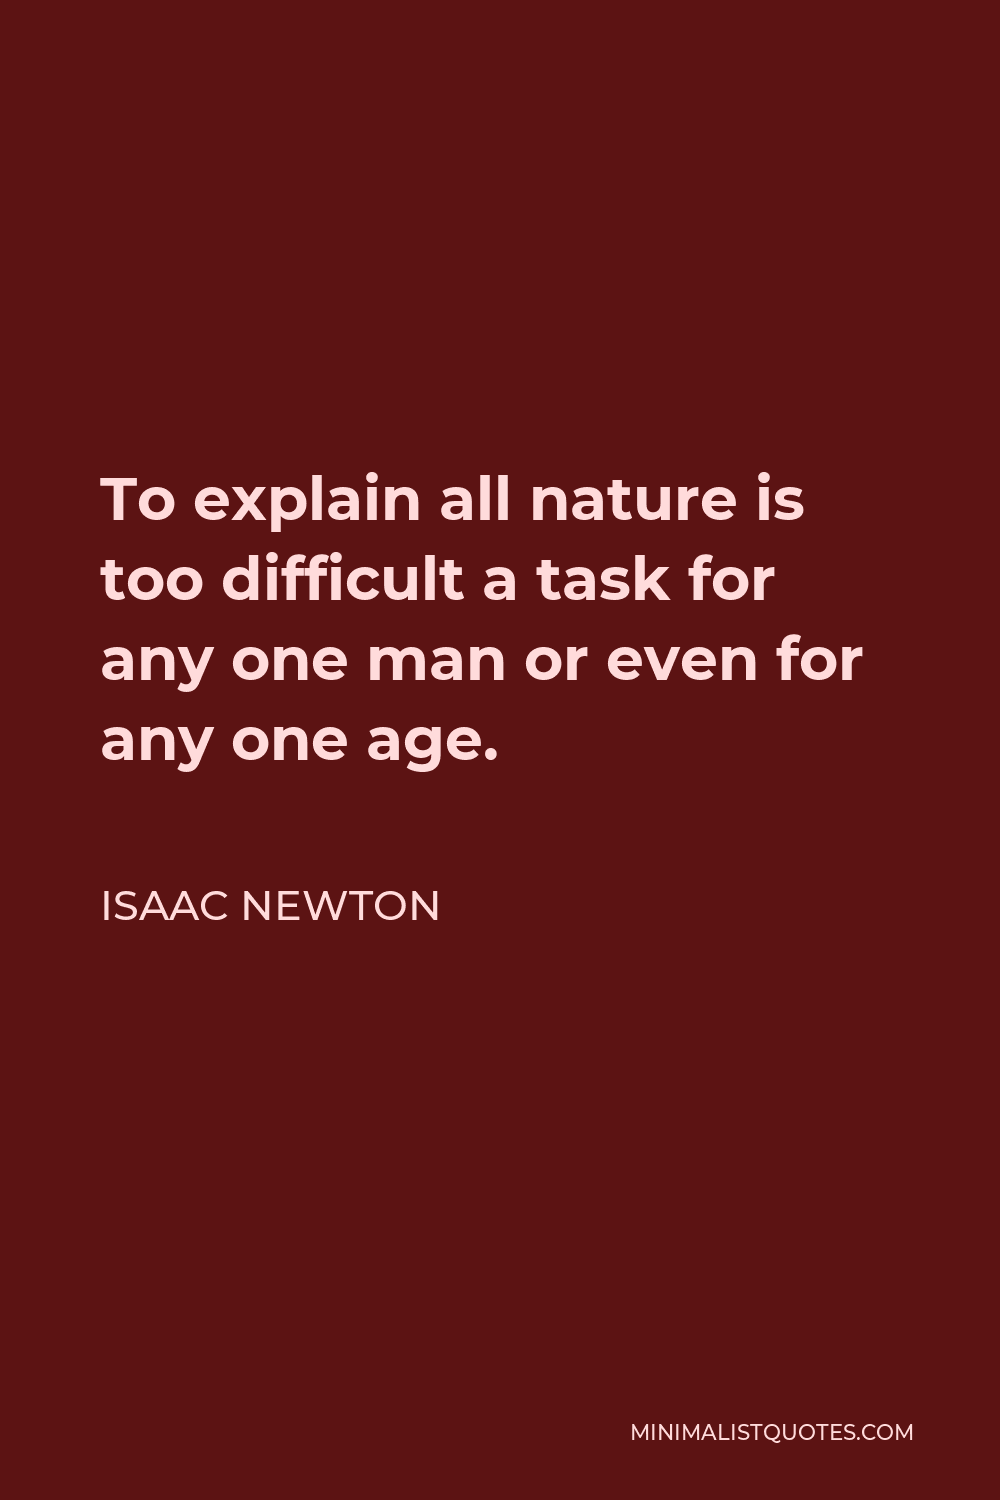 Isaac Newton Quote - To explain all nature is too difficult a task for any one man or even for any one age.